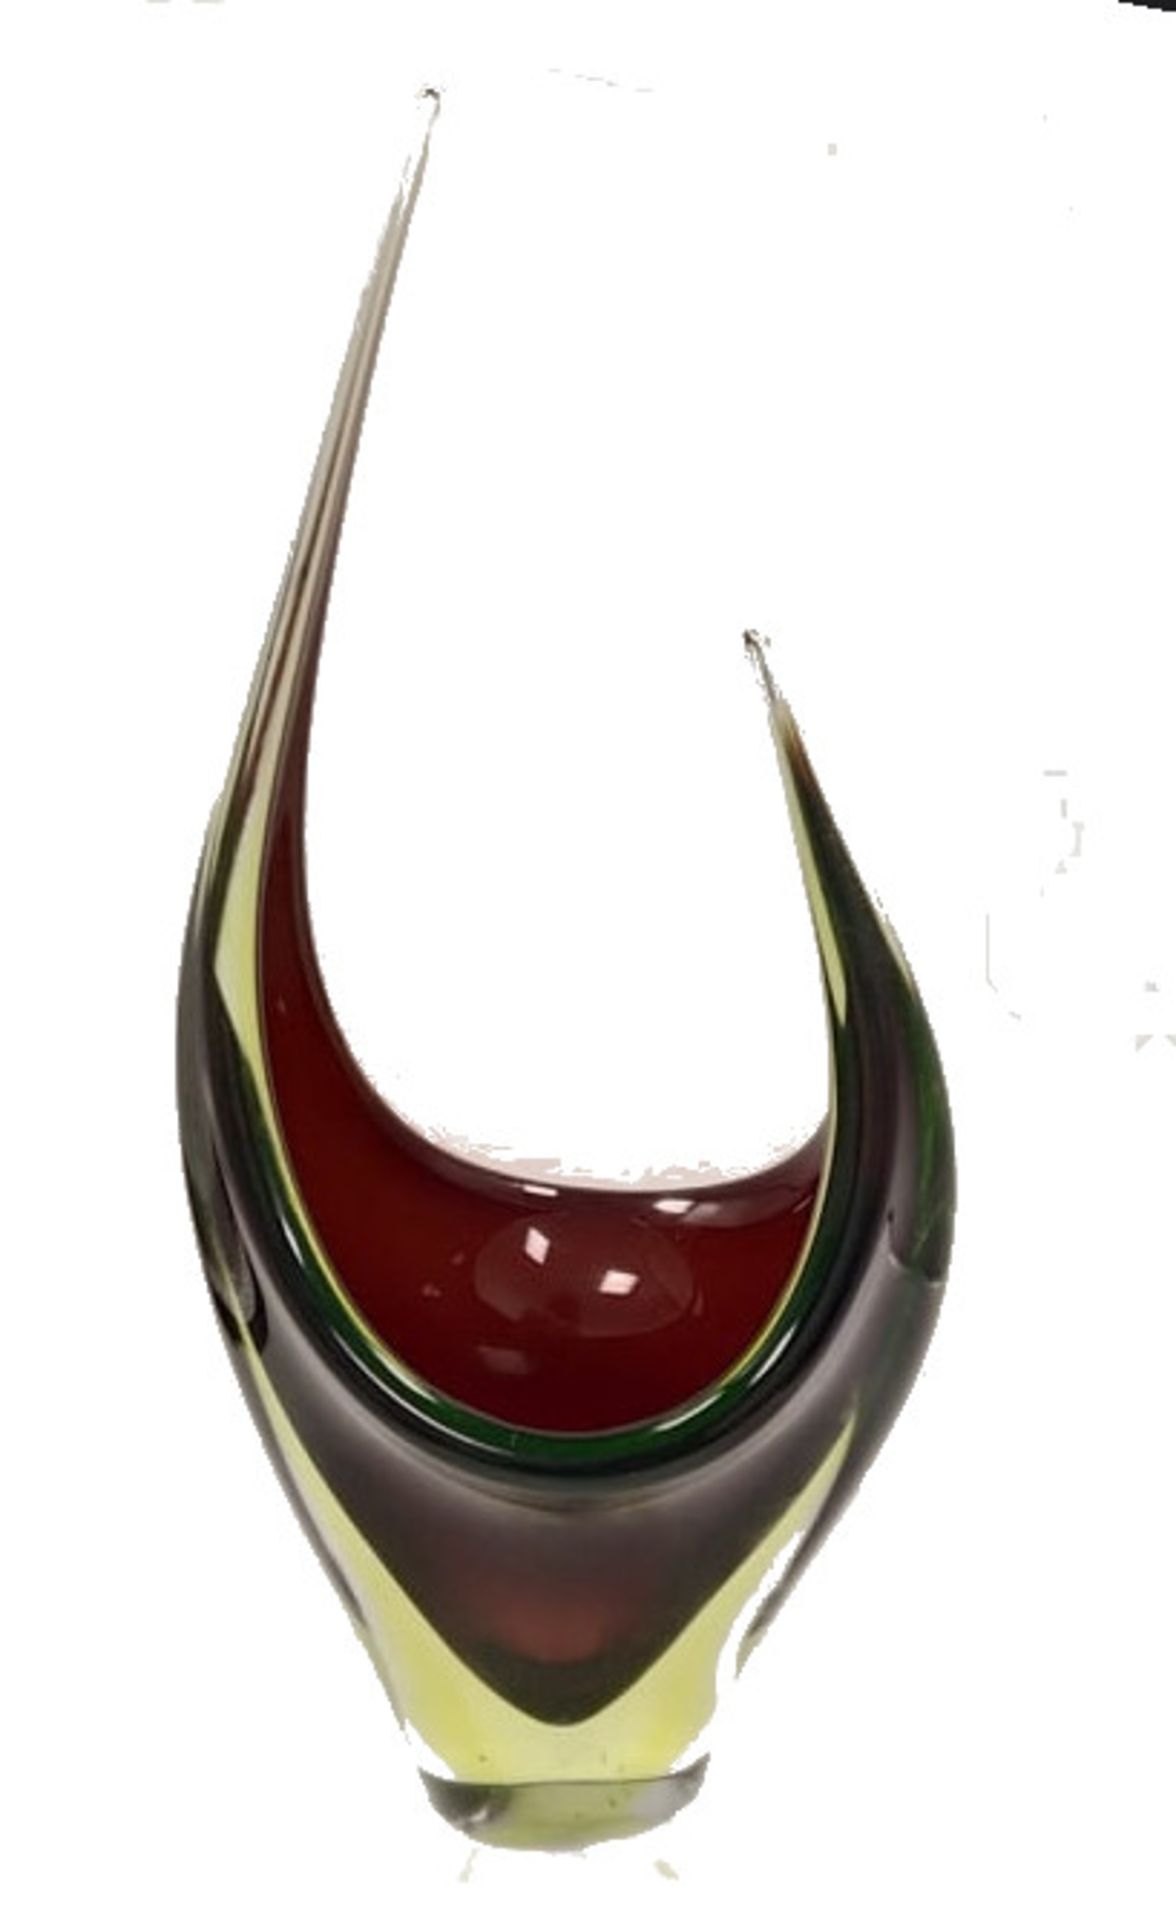 Murano | Sommerso Vase - Image 4 of 7